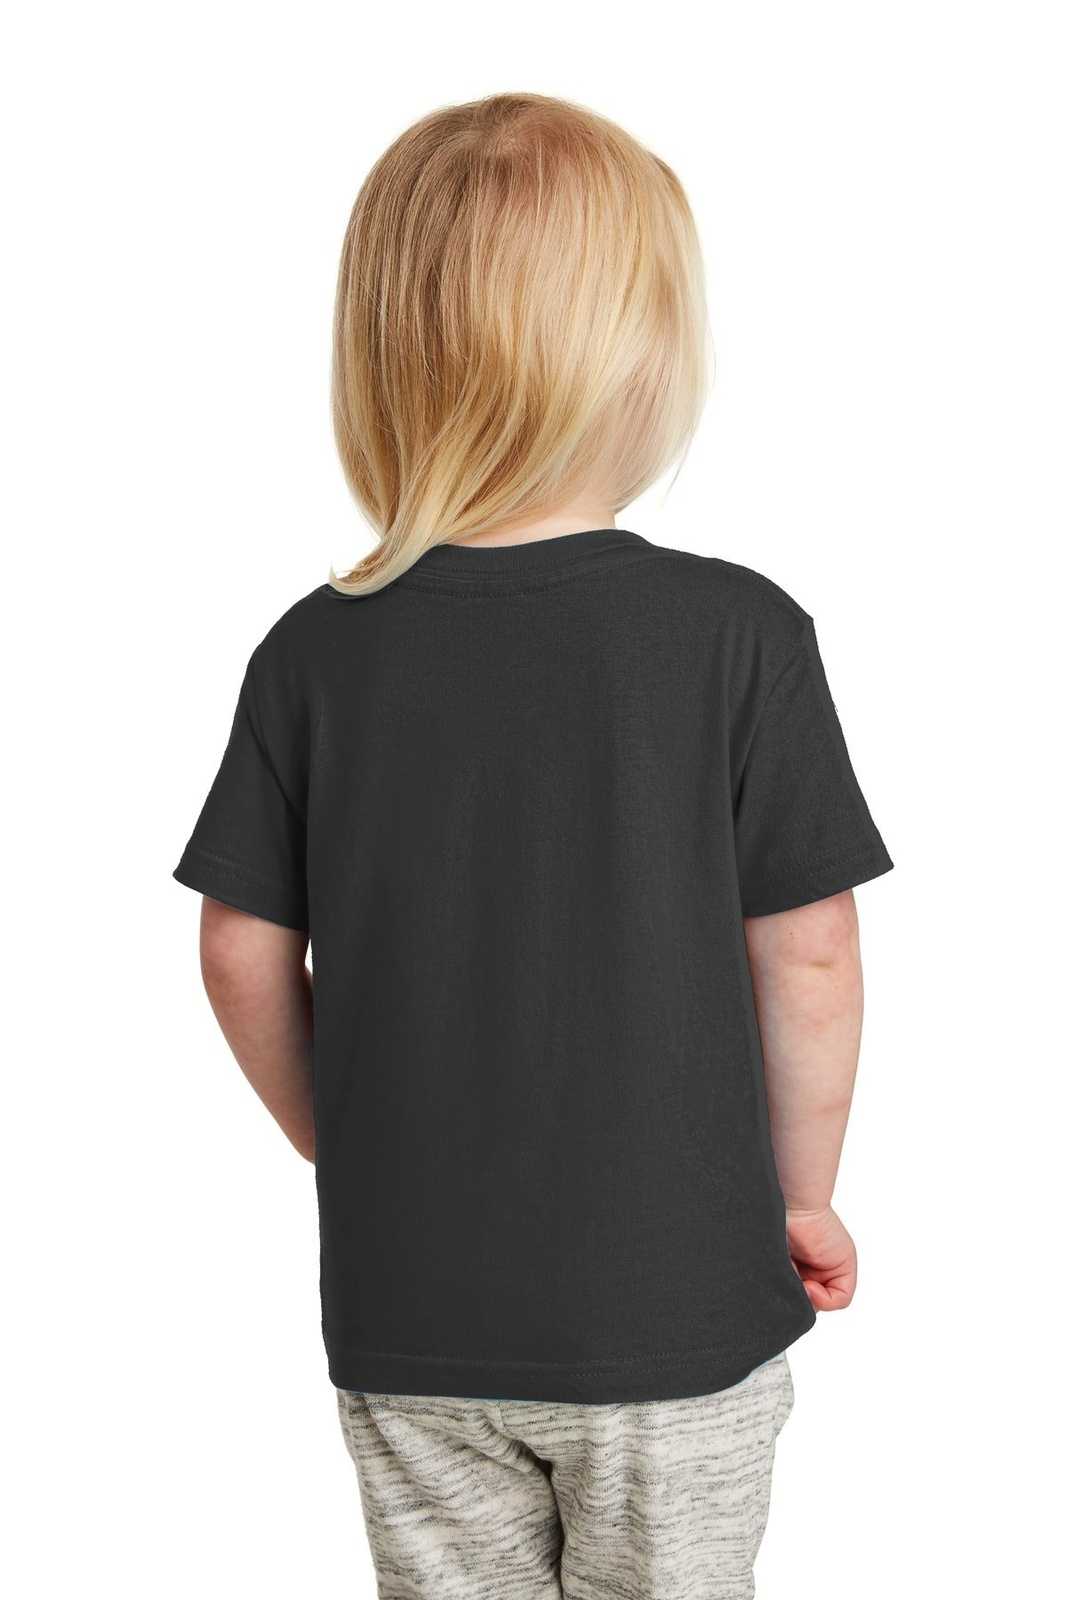 Rabbit Skins 3321 Toddler Fine Jersey Tee - Black - HIT a Double